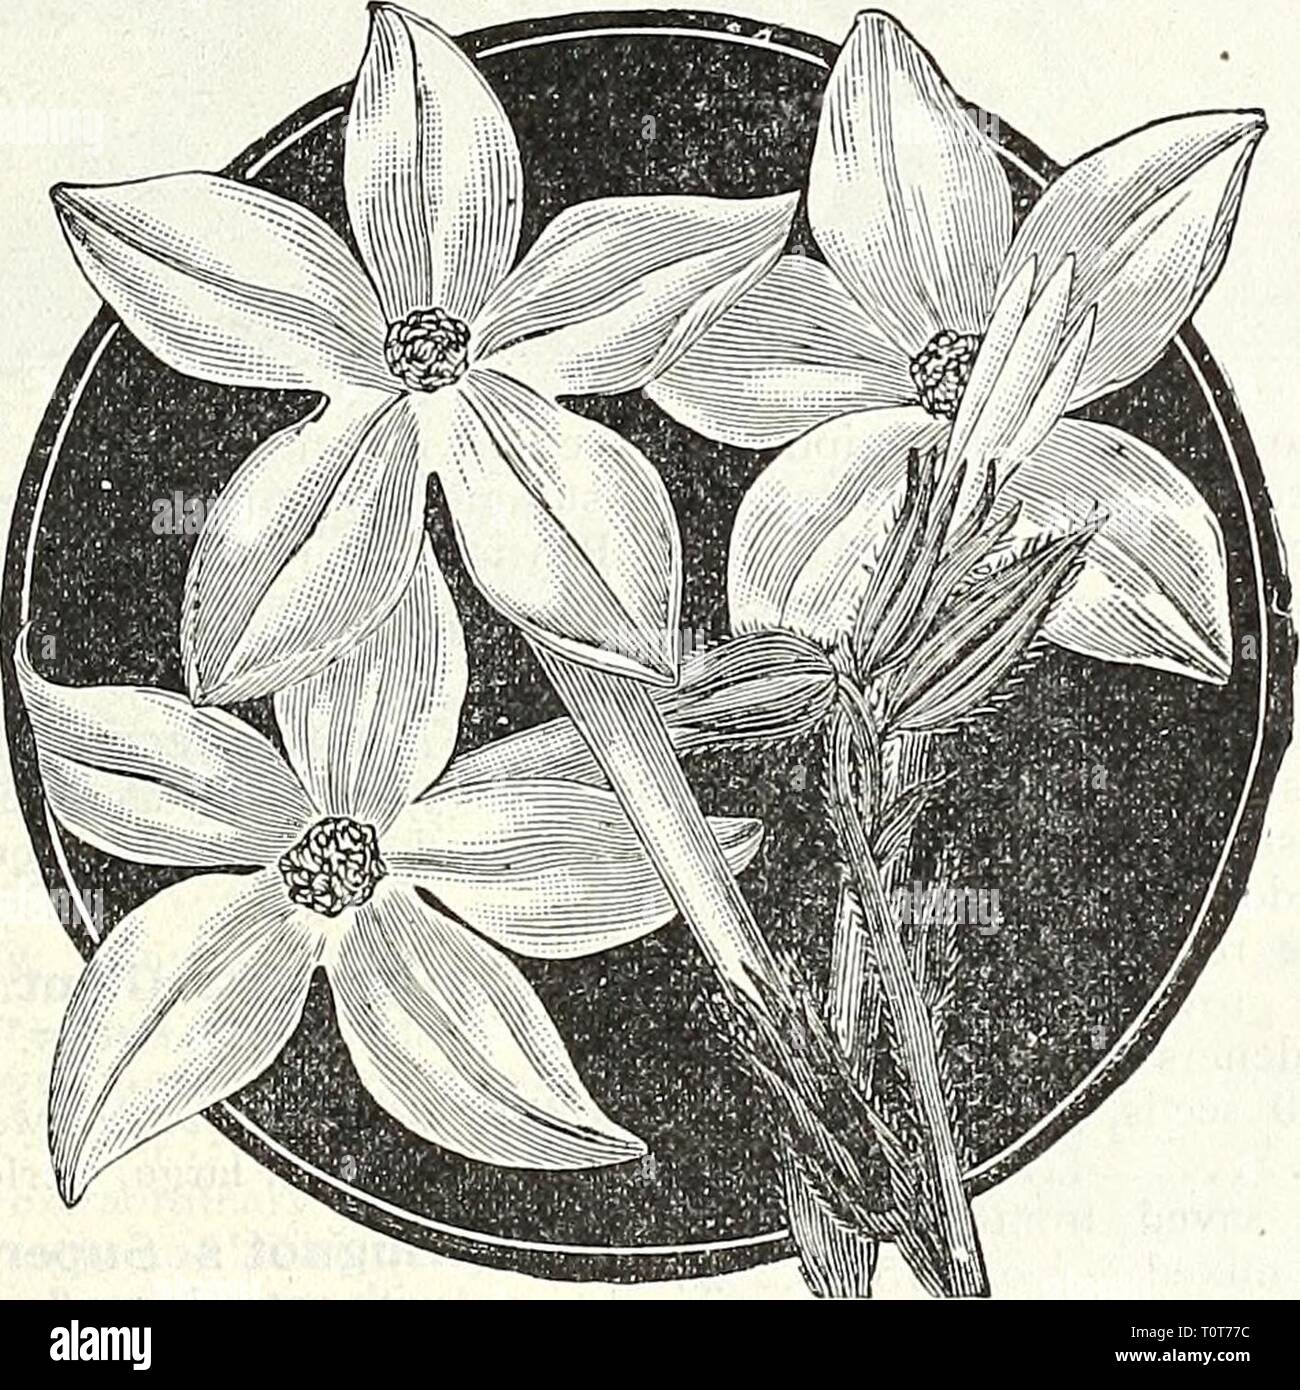 Dreer's garden book  1905 Dreer's garden book : 1905  dreersgardenbook1905henr Year: 1905  10 25 (Cup Flower.) A half-hardy perennial, slender- growing plant, perpetually in bloom, flowering the first year if sown early ; desirable for the greenhouse, baskets, vases, or bedding out; 1 ft. 3421 Frutescens. White, tinted with lilac 10    NiCOTIANA AfFINIS. NEMOPHILA. (Love-grove.) PER PKT. 3400 Of neat, compact habit; blooming freely all sum- mer, if planted in a rather cool, shady place, and in not too rich a soil; hardy annuals. Beautiful mixed varieties. (Seectil.) Oz., 25 cts 5 NIGELI.A. (Lo Stock Photo